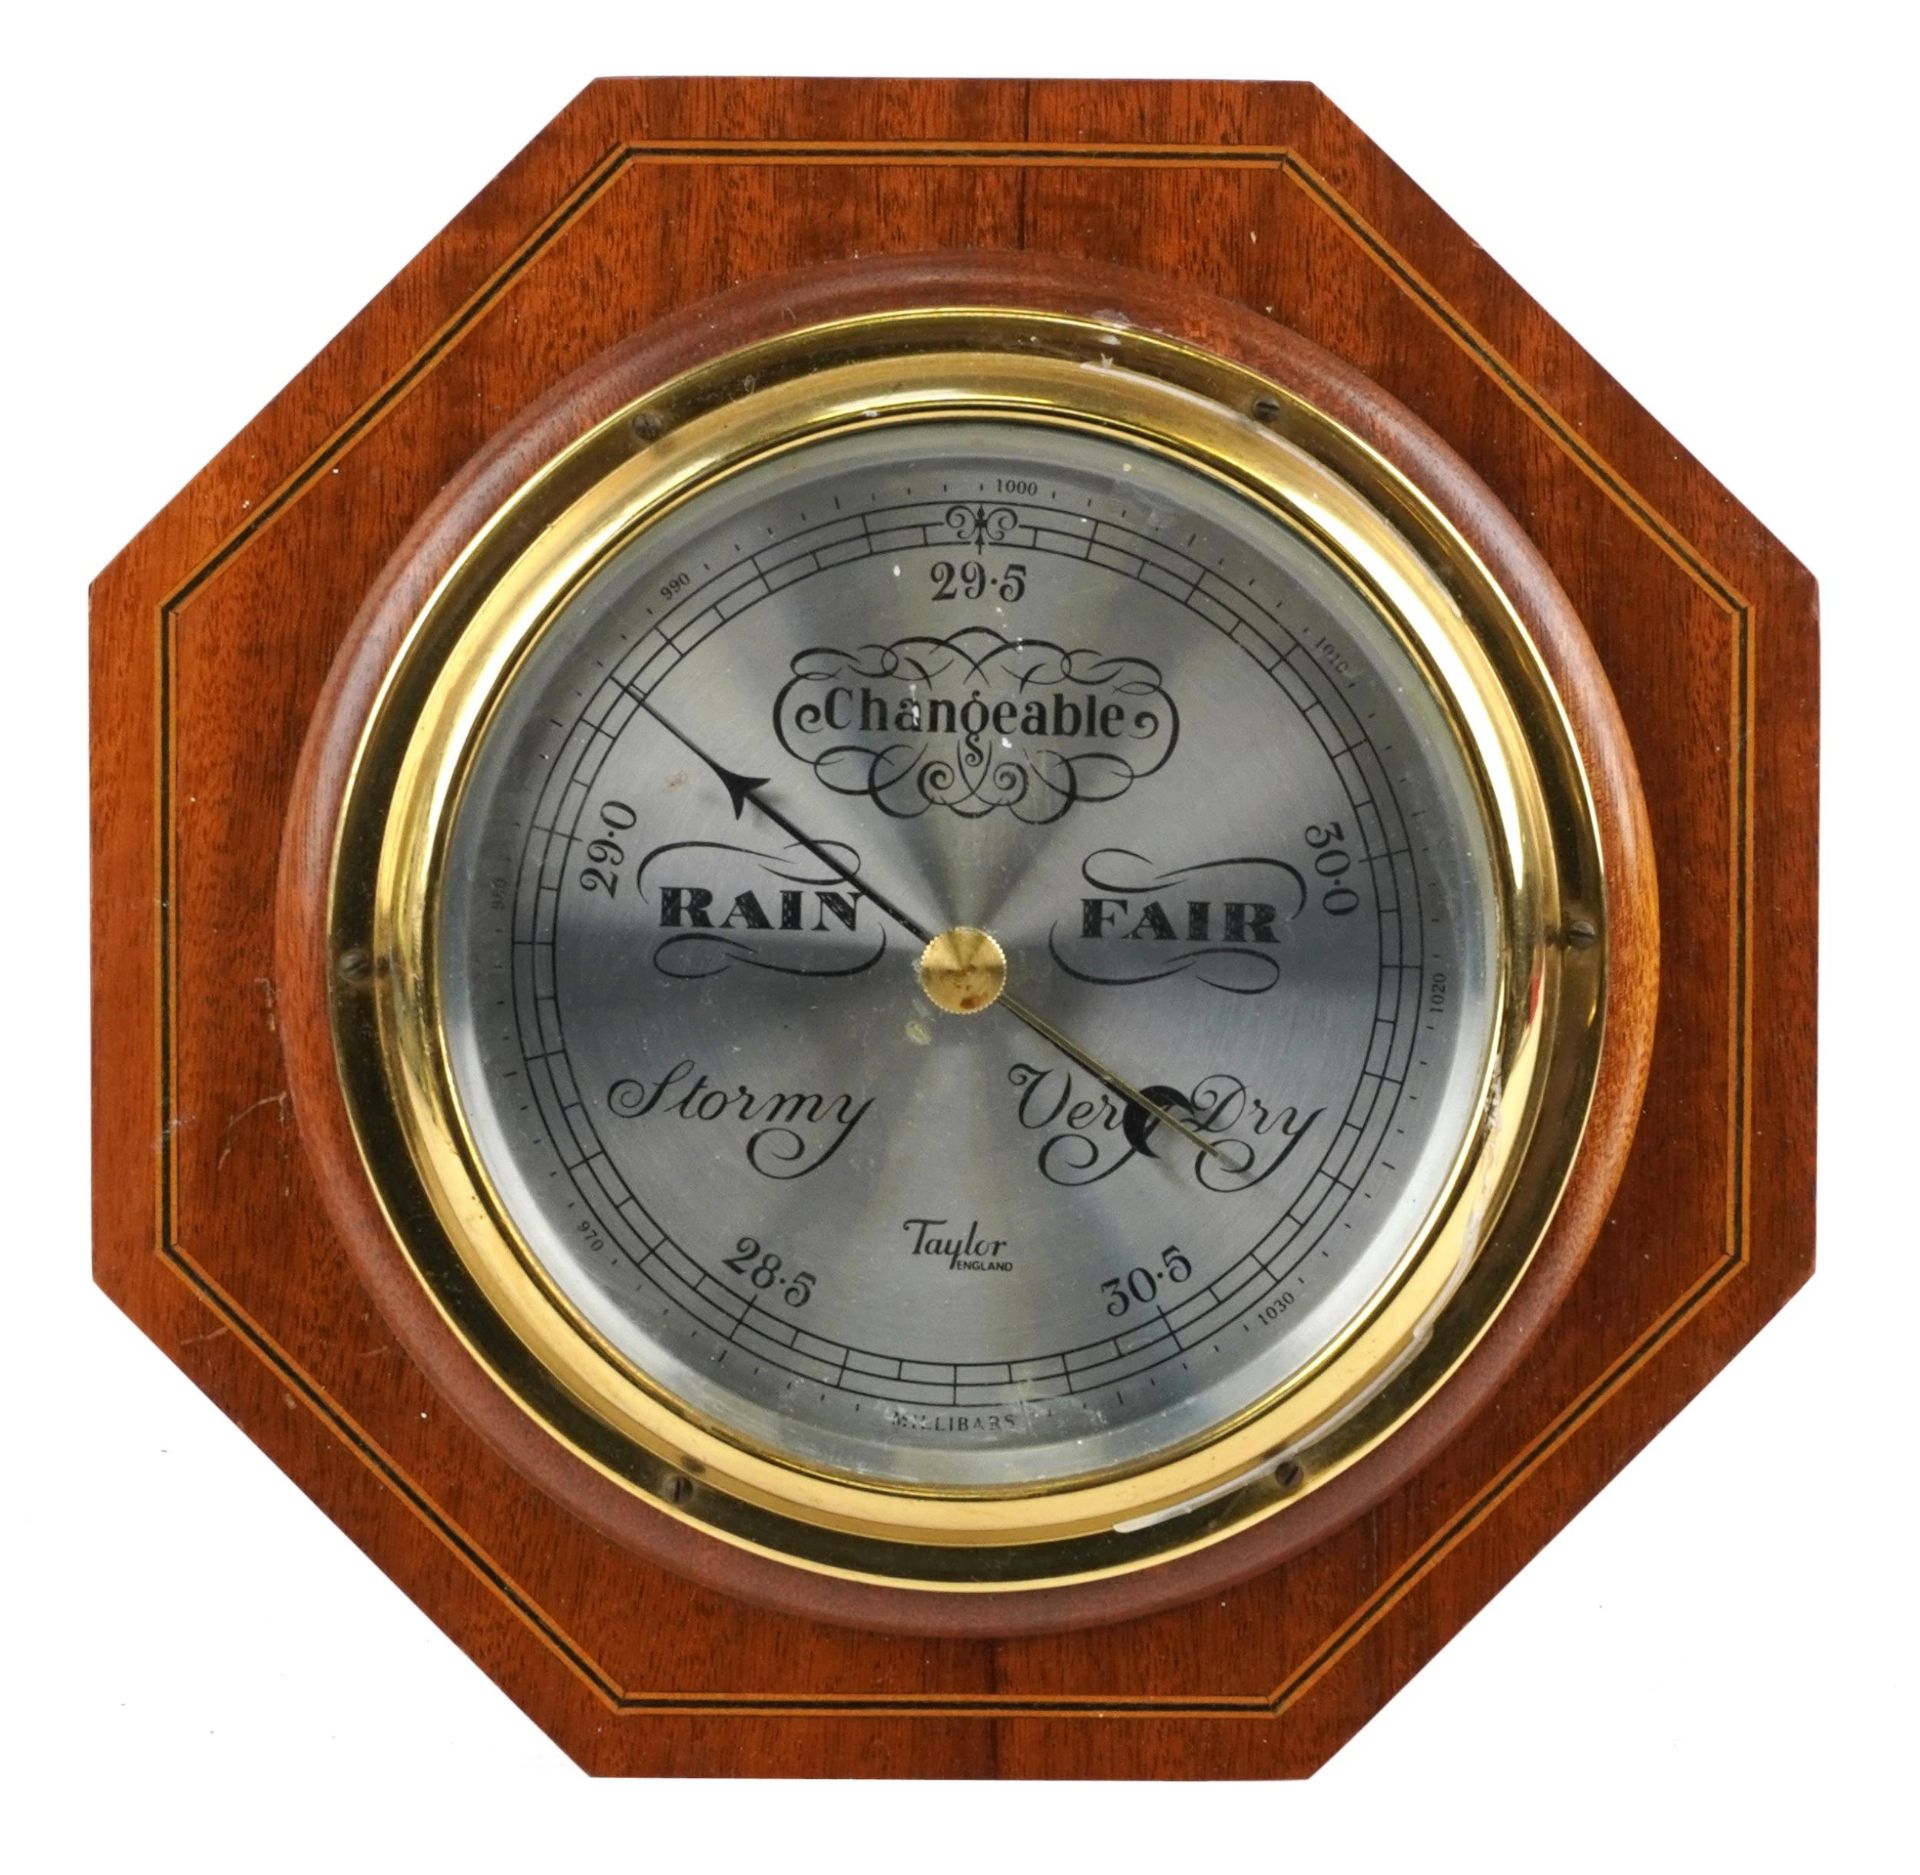 Hexagonal inlaid mahogany wall barometer by Taylor of England, 26cm in diameter : For further